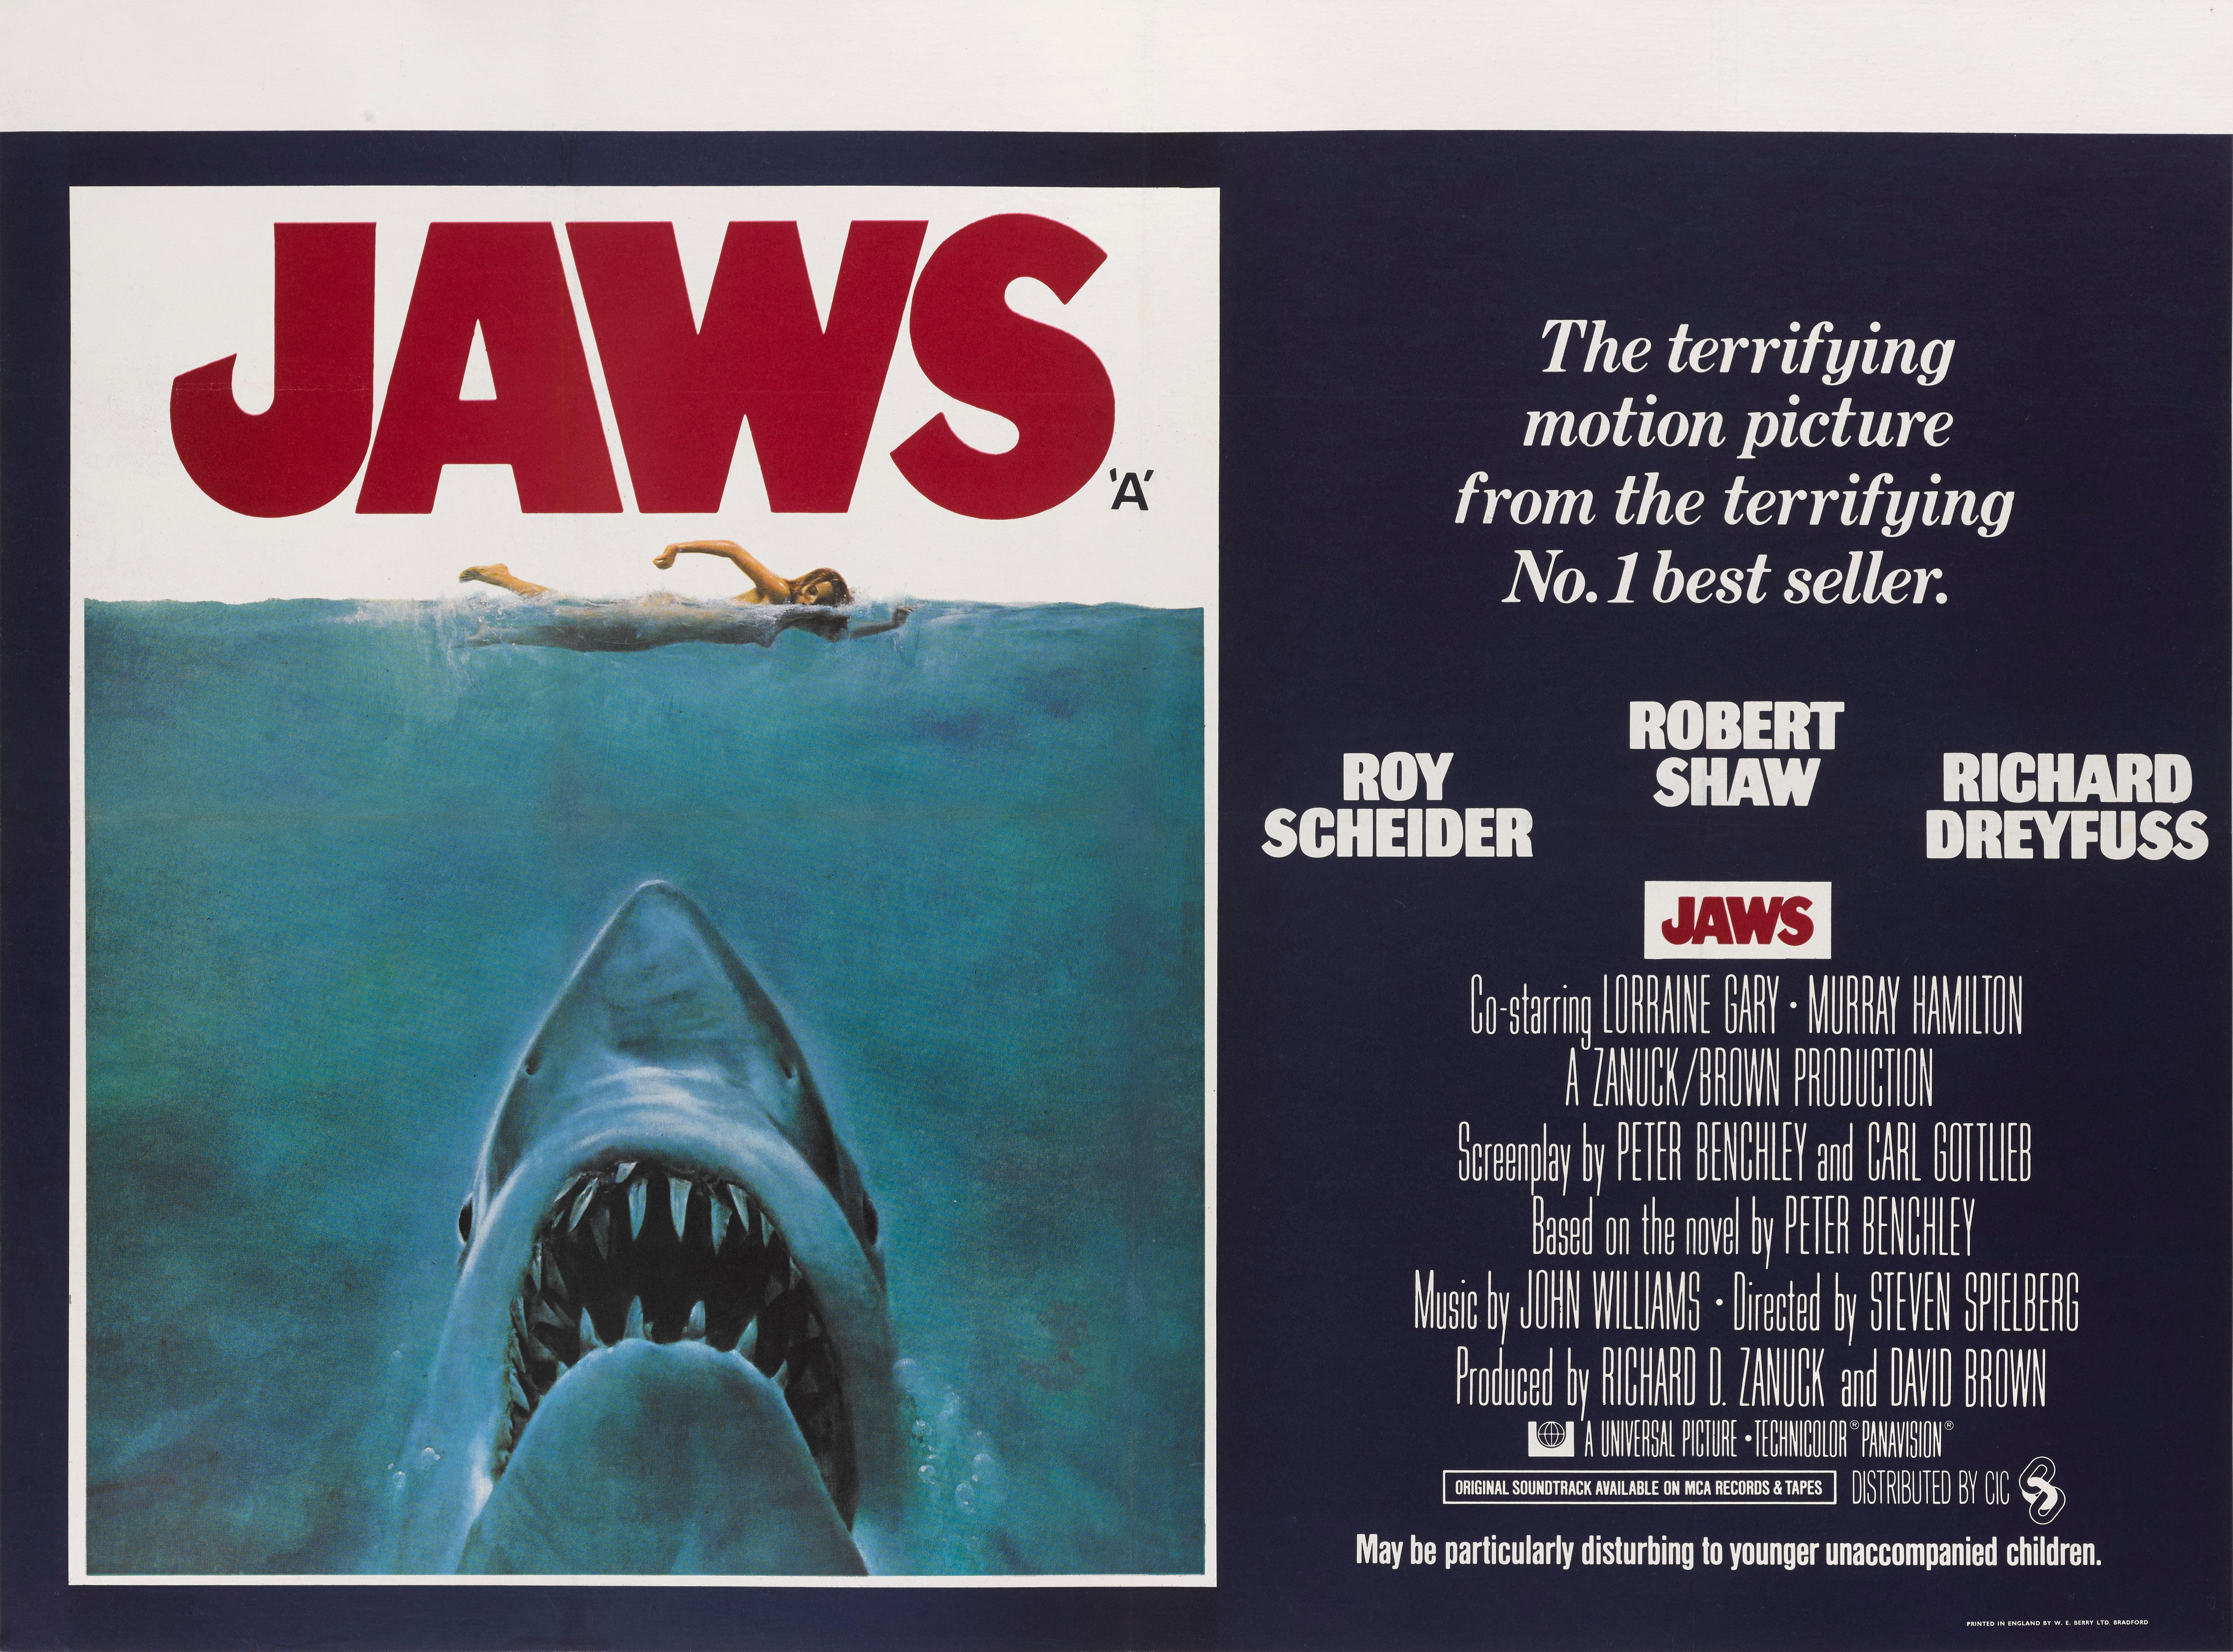 Original British film poster for Jaws, (1975)
Jaws invented the summer blockbuster and was a massive hit that shattered box office records. It was the film that propelled Steven Spielberg to international fame, and frightened a whole generation out